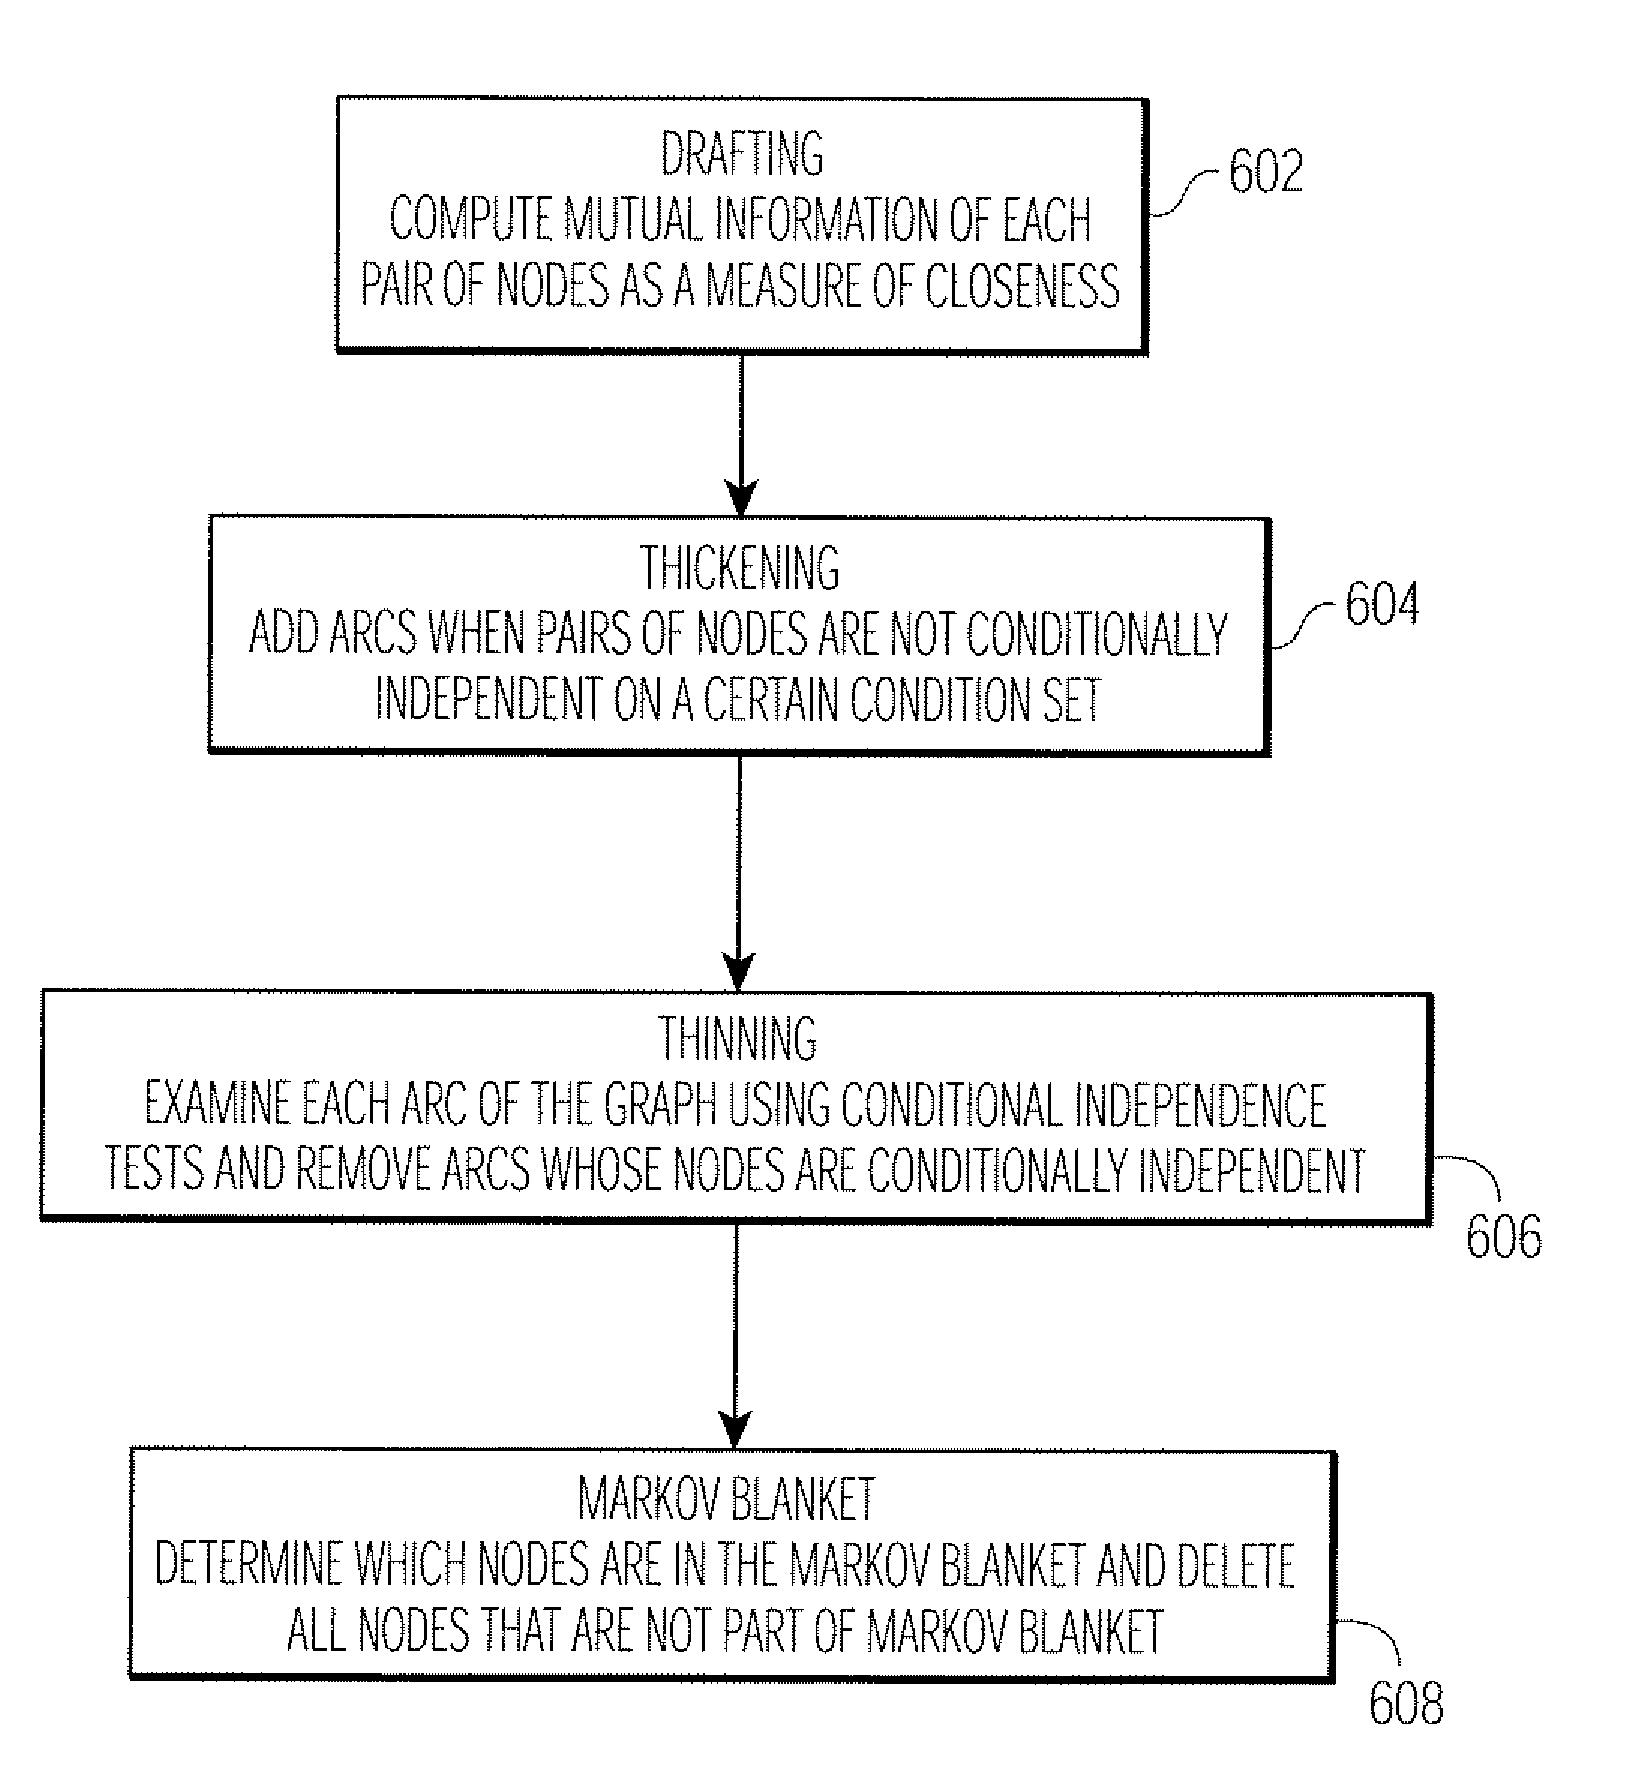 Method and Apparatus for Classifying Tissue Using Image Data